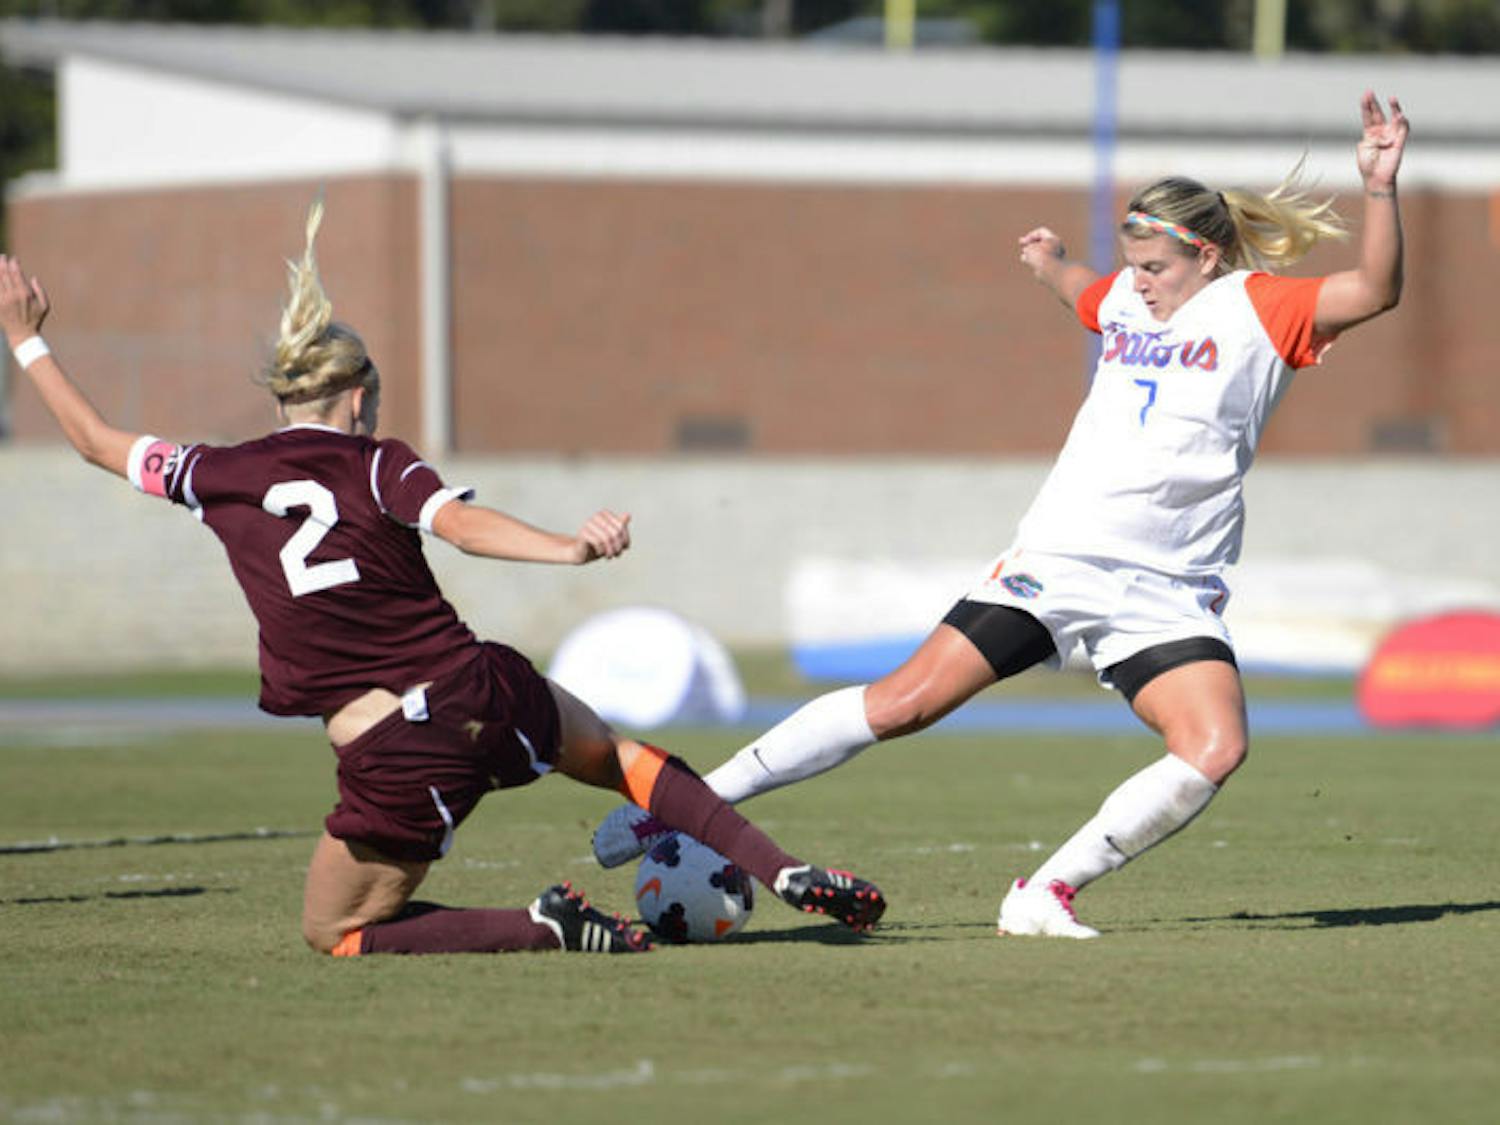 Savannah Jordan battles for the ball during Florida’s 2-0 victory against Texas A&amp;M on Oct. 27 at James G. Pressly Stadium.